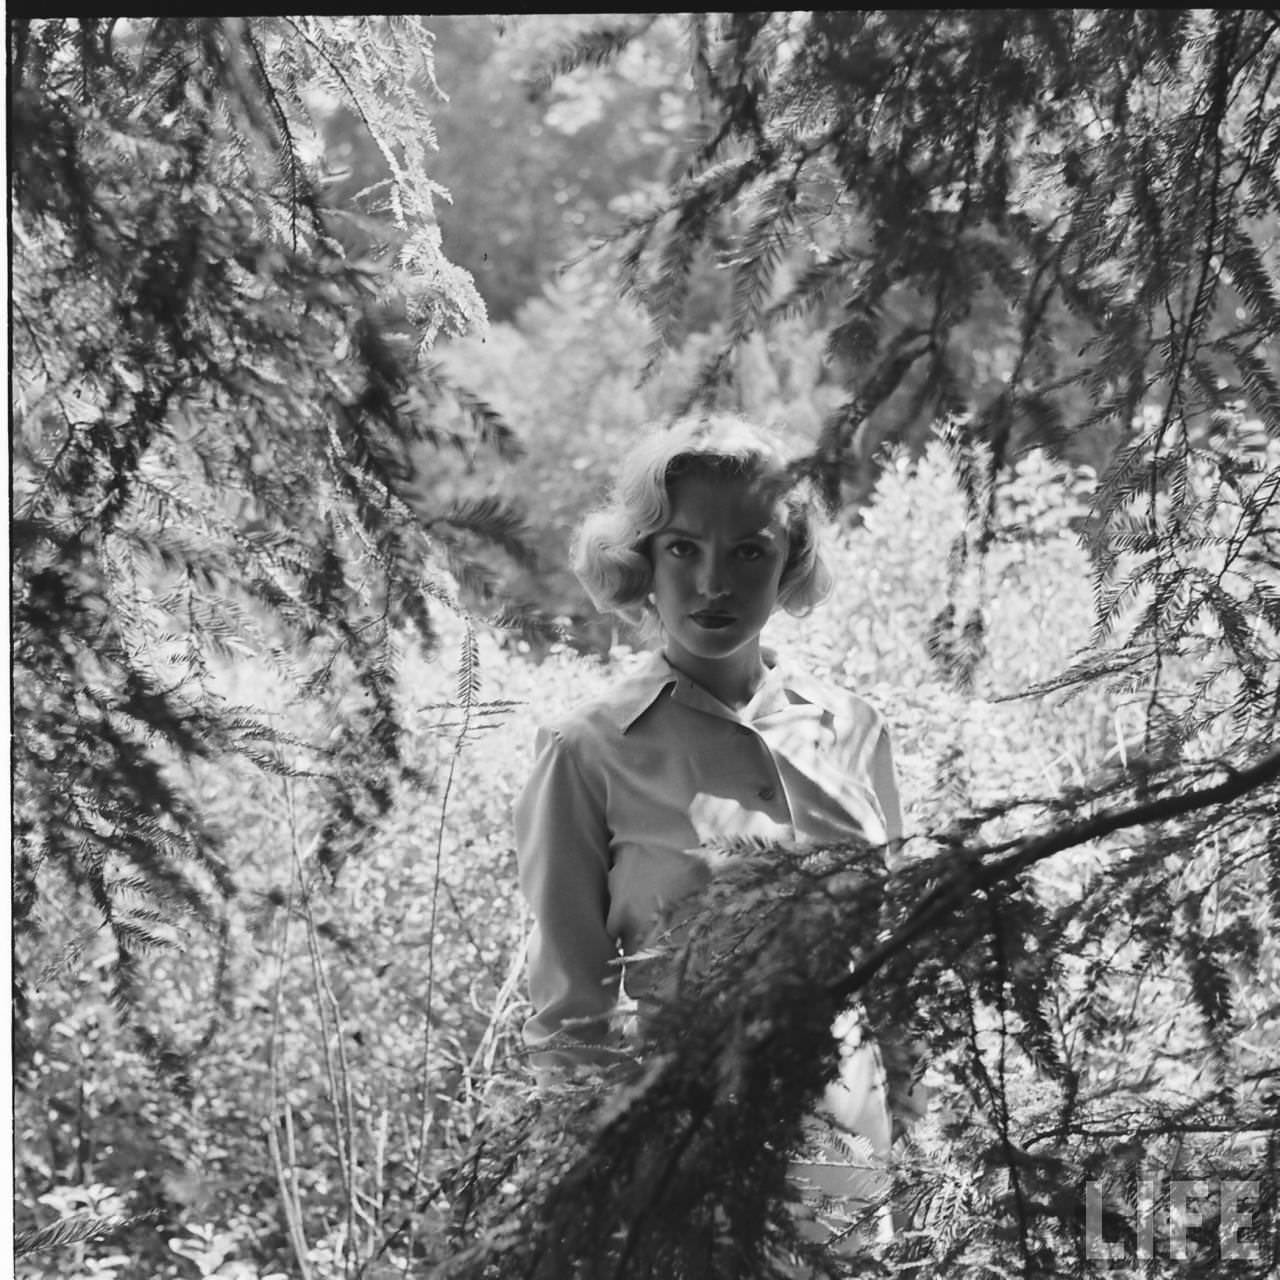 The Girl Next Door: Iconic Photographs of Marilyn Monroe Hiking in the Woods, 1950